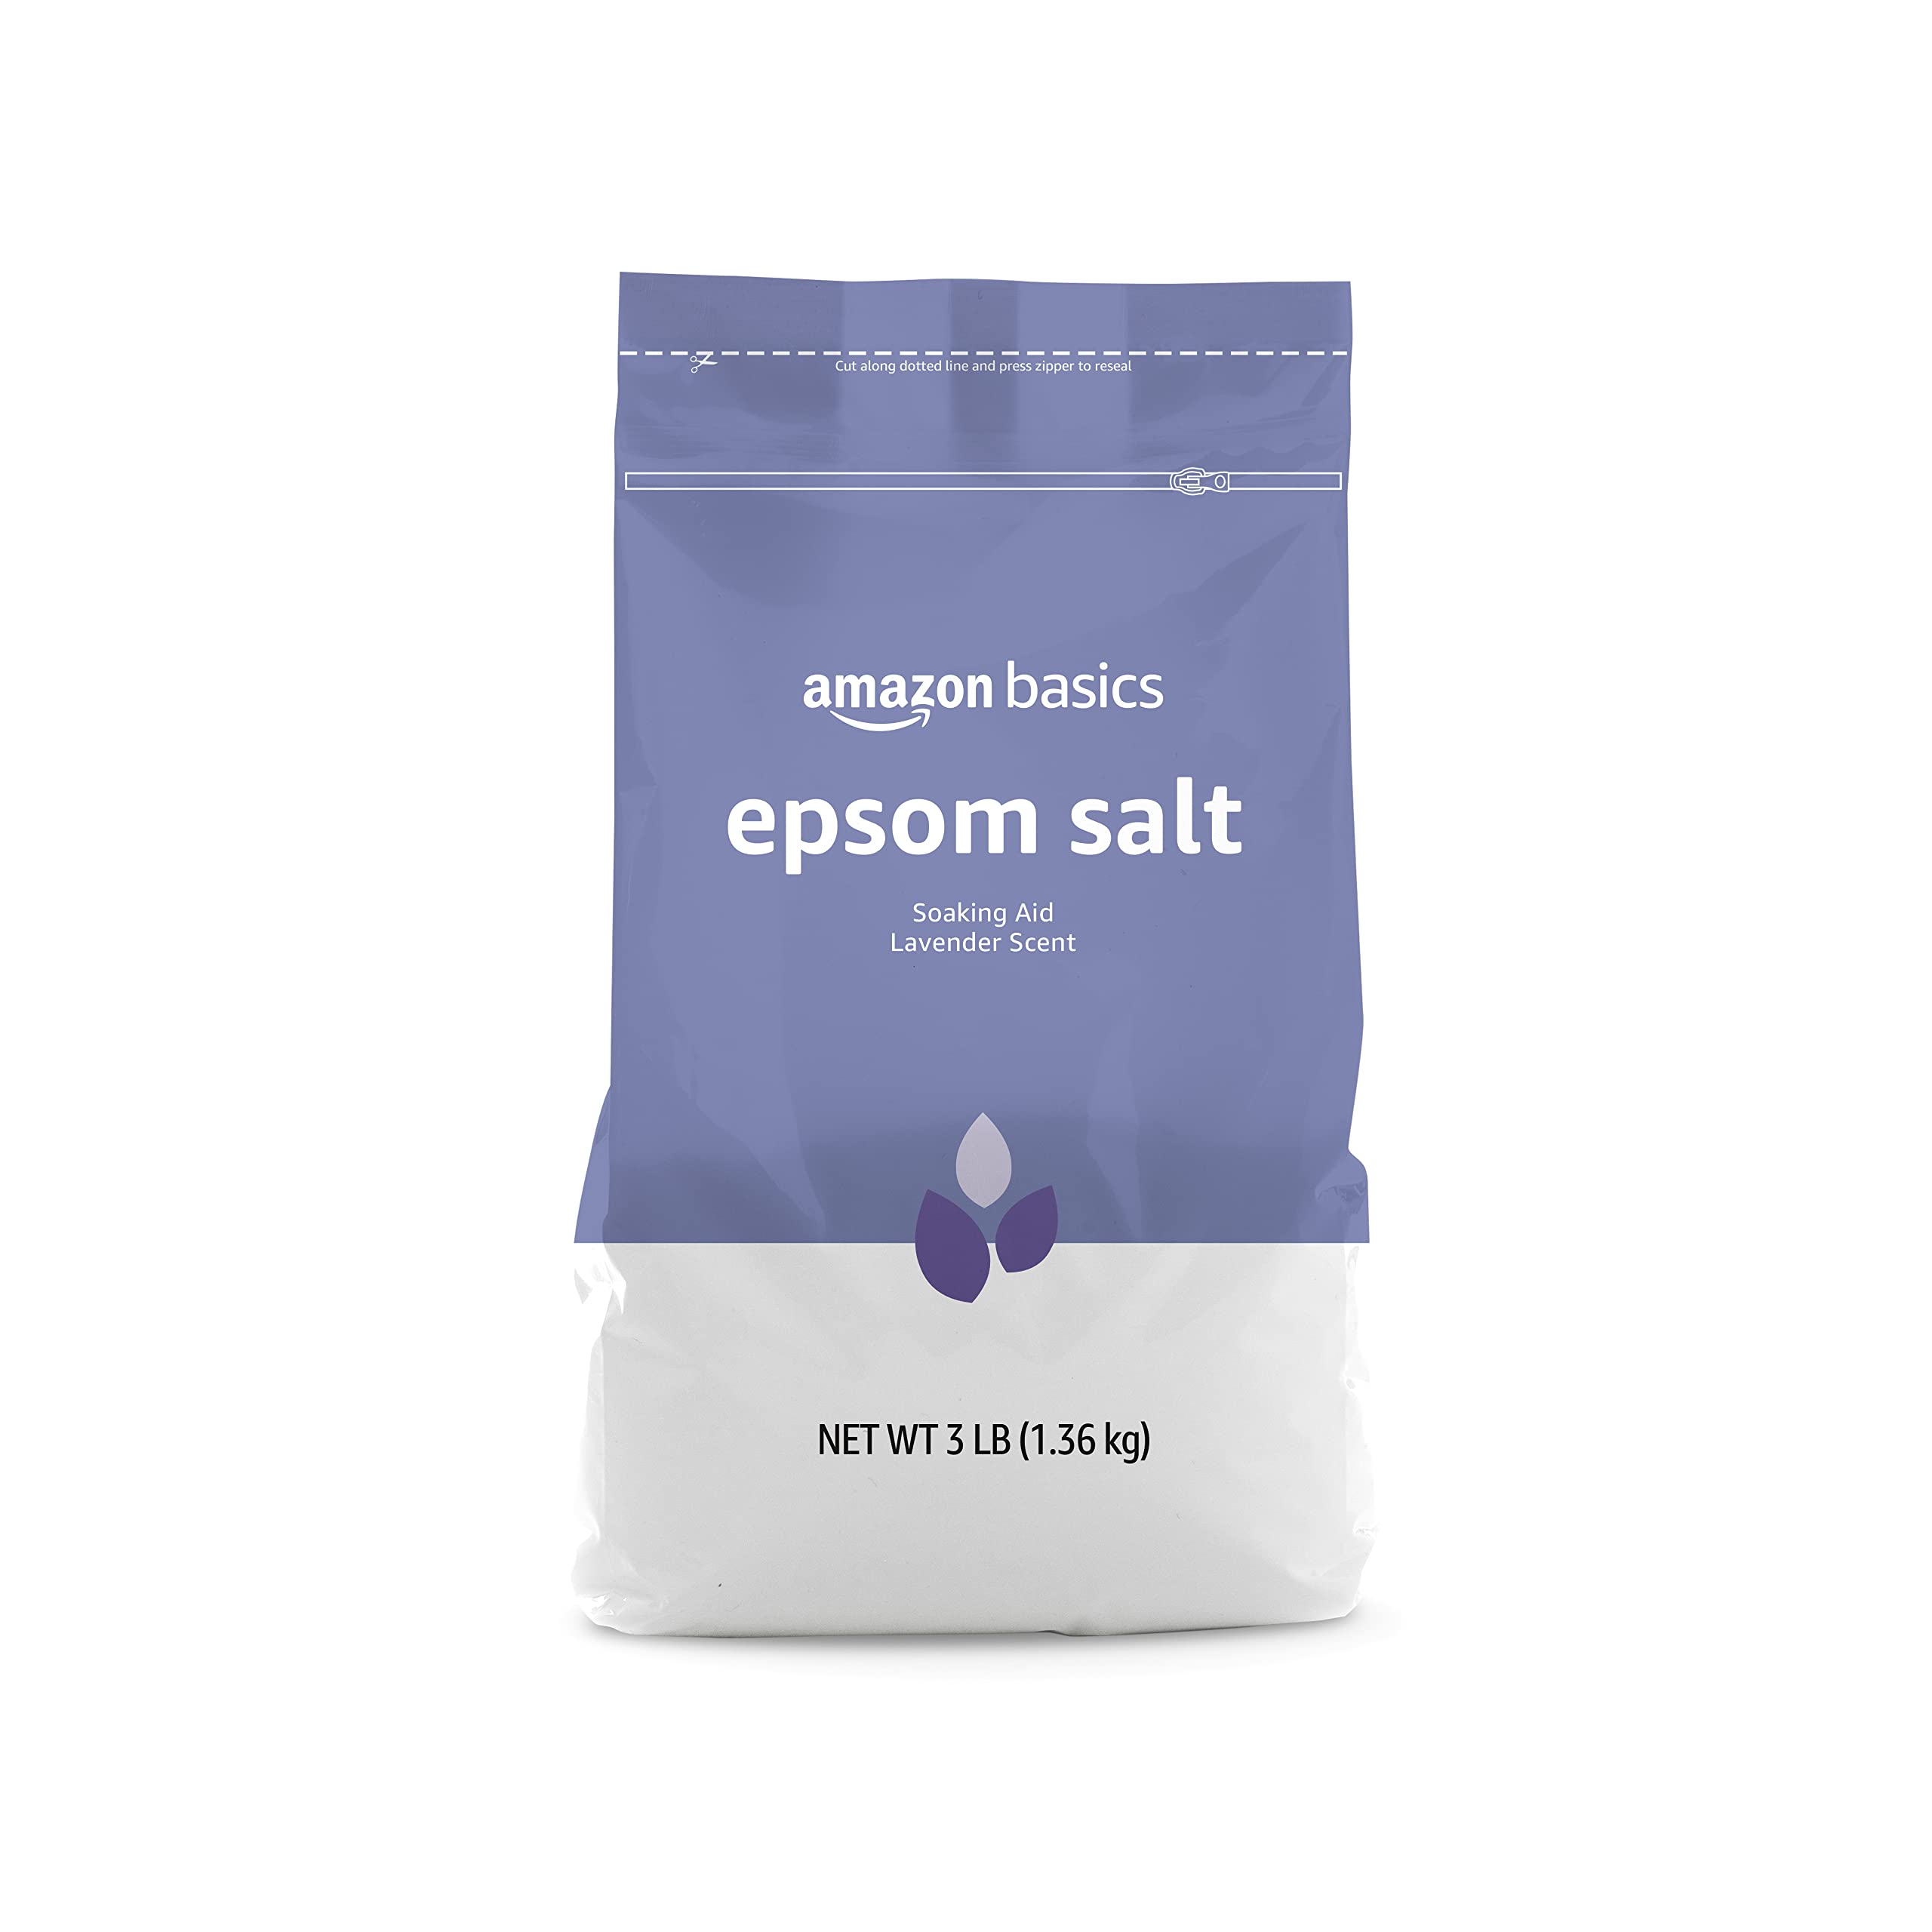 Amazon Basics Epsom Salt Soaking Aid, Lavender Scented, 3 Pound, 6-Pack (Previously Solimo)